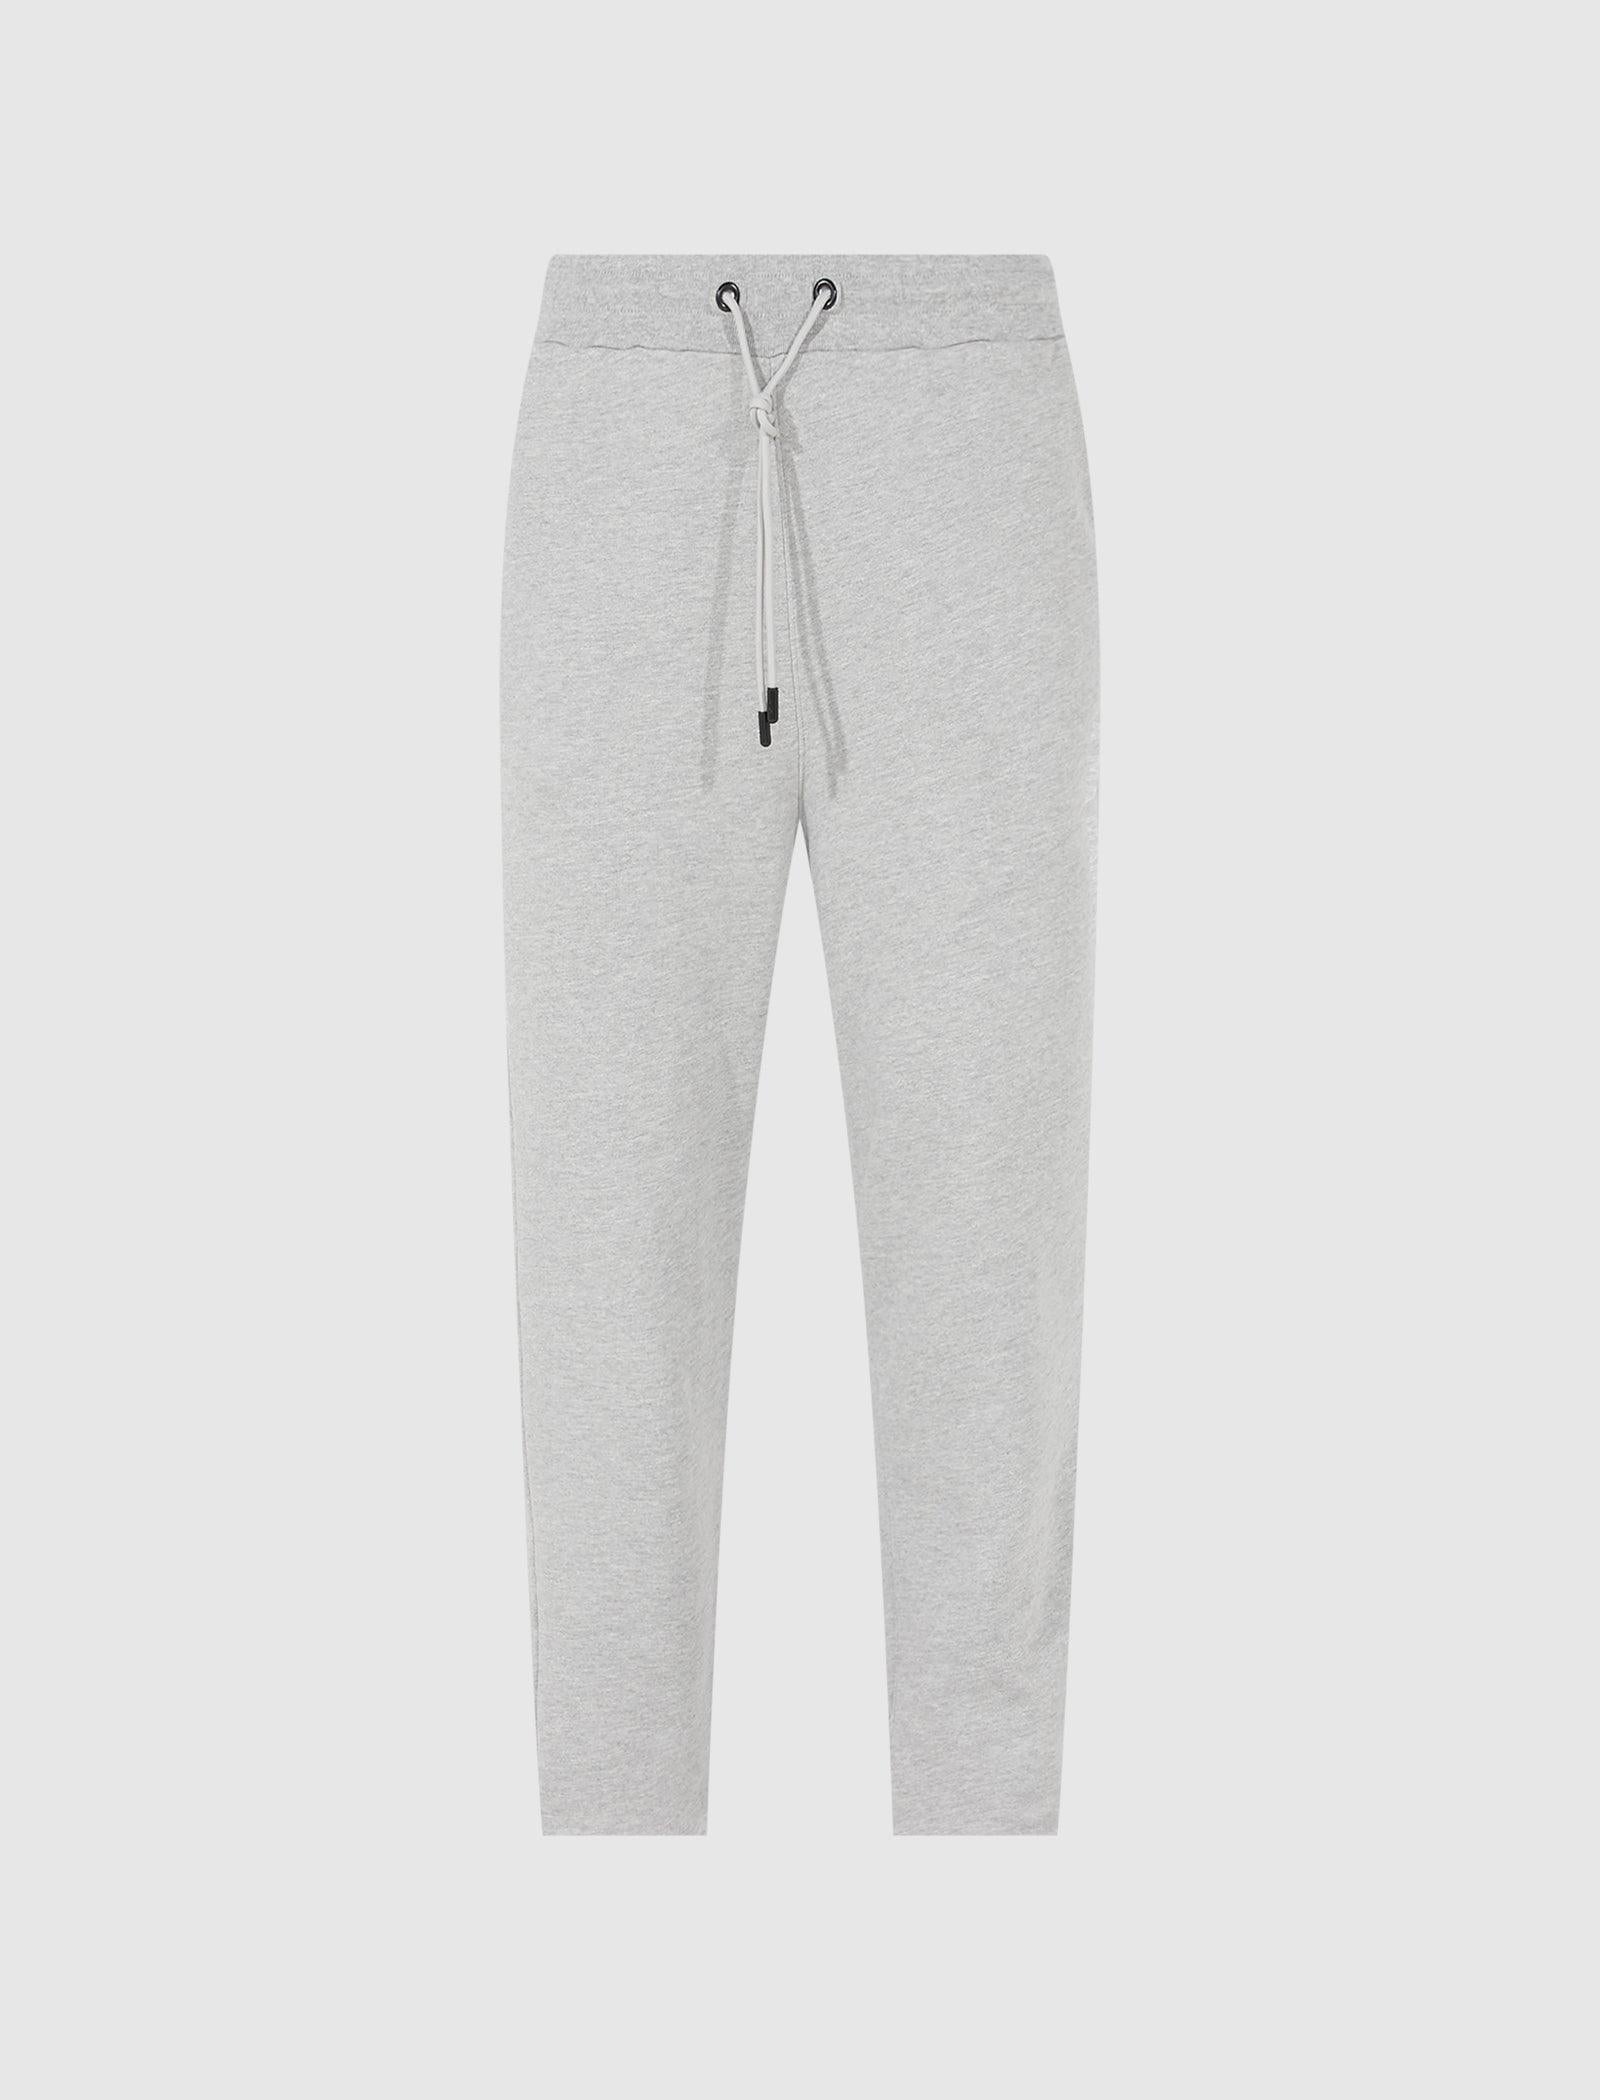 EMBROIDERED SWEATPANT